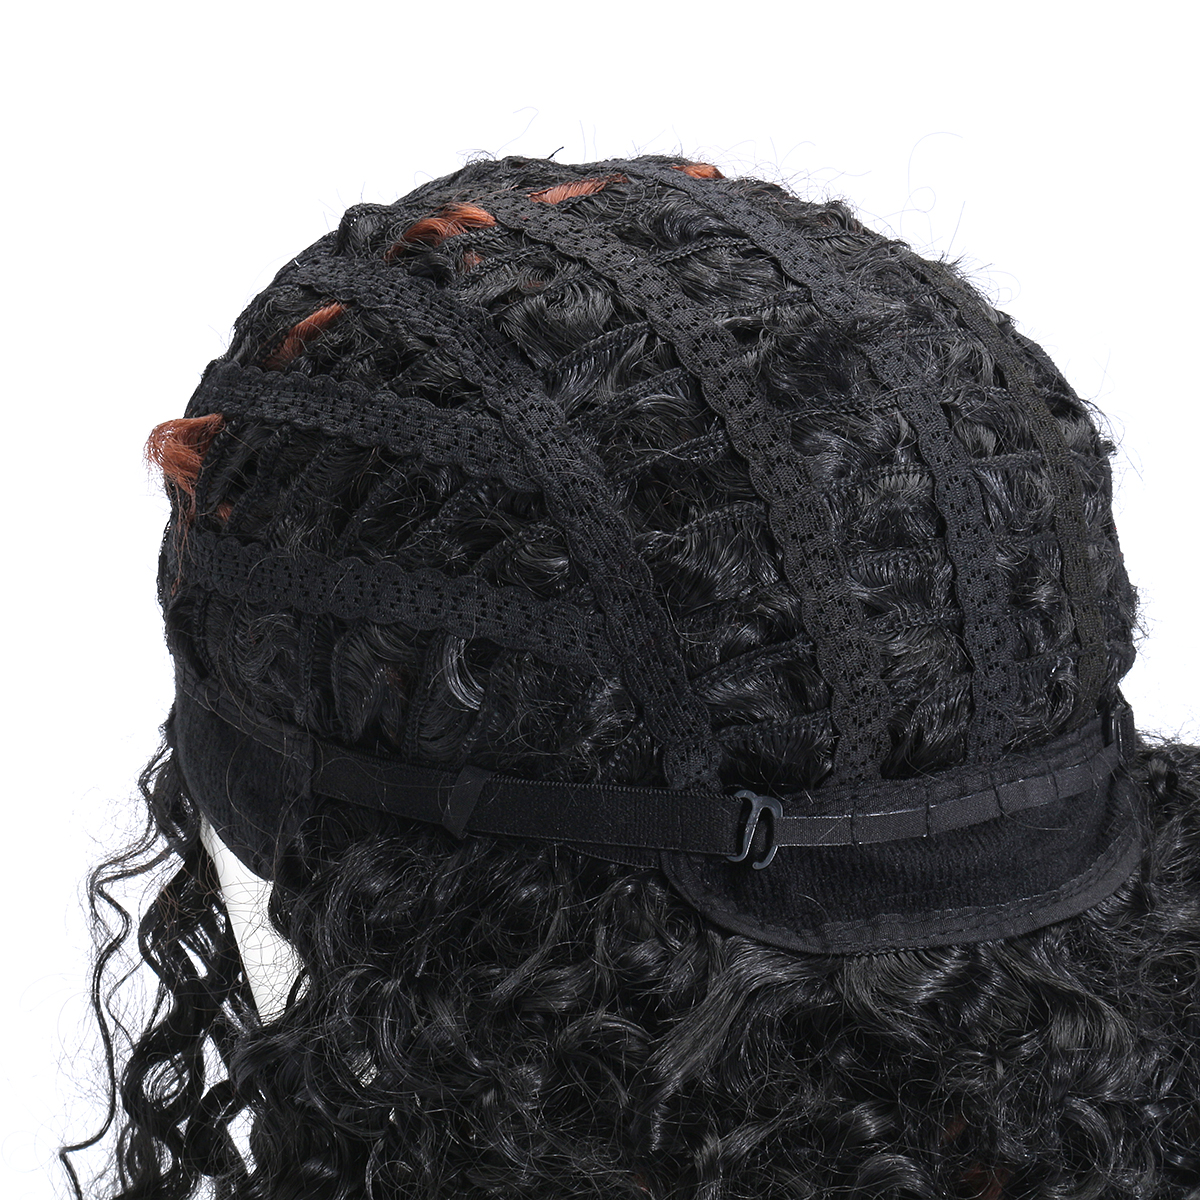 Brazilian-Black-Brown-Hair-Deep-Wavy-Curly-Lace-Front-Full-Wig-1230999-7